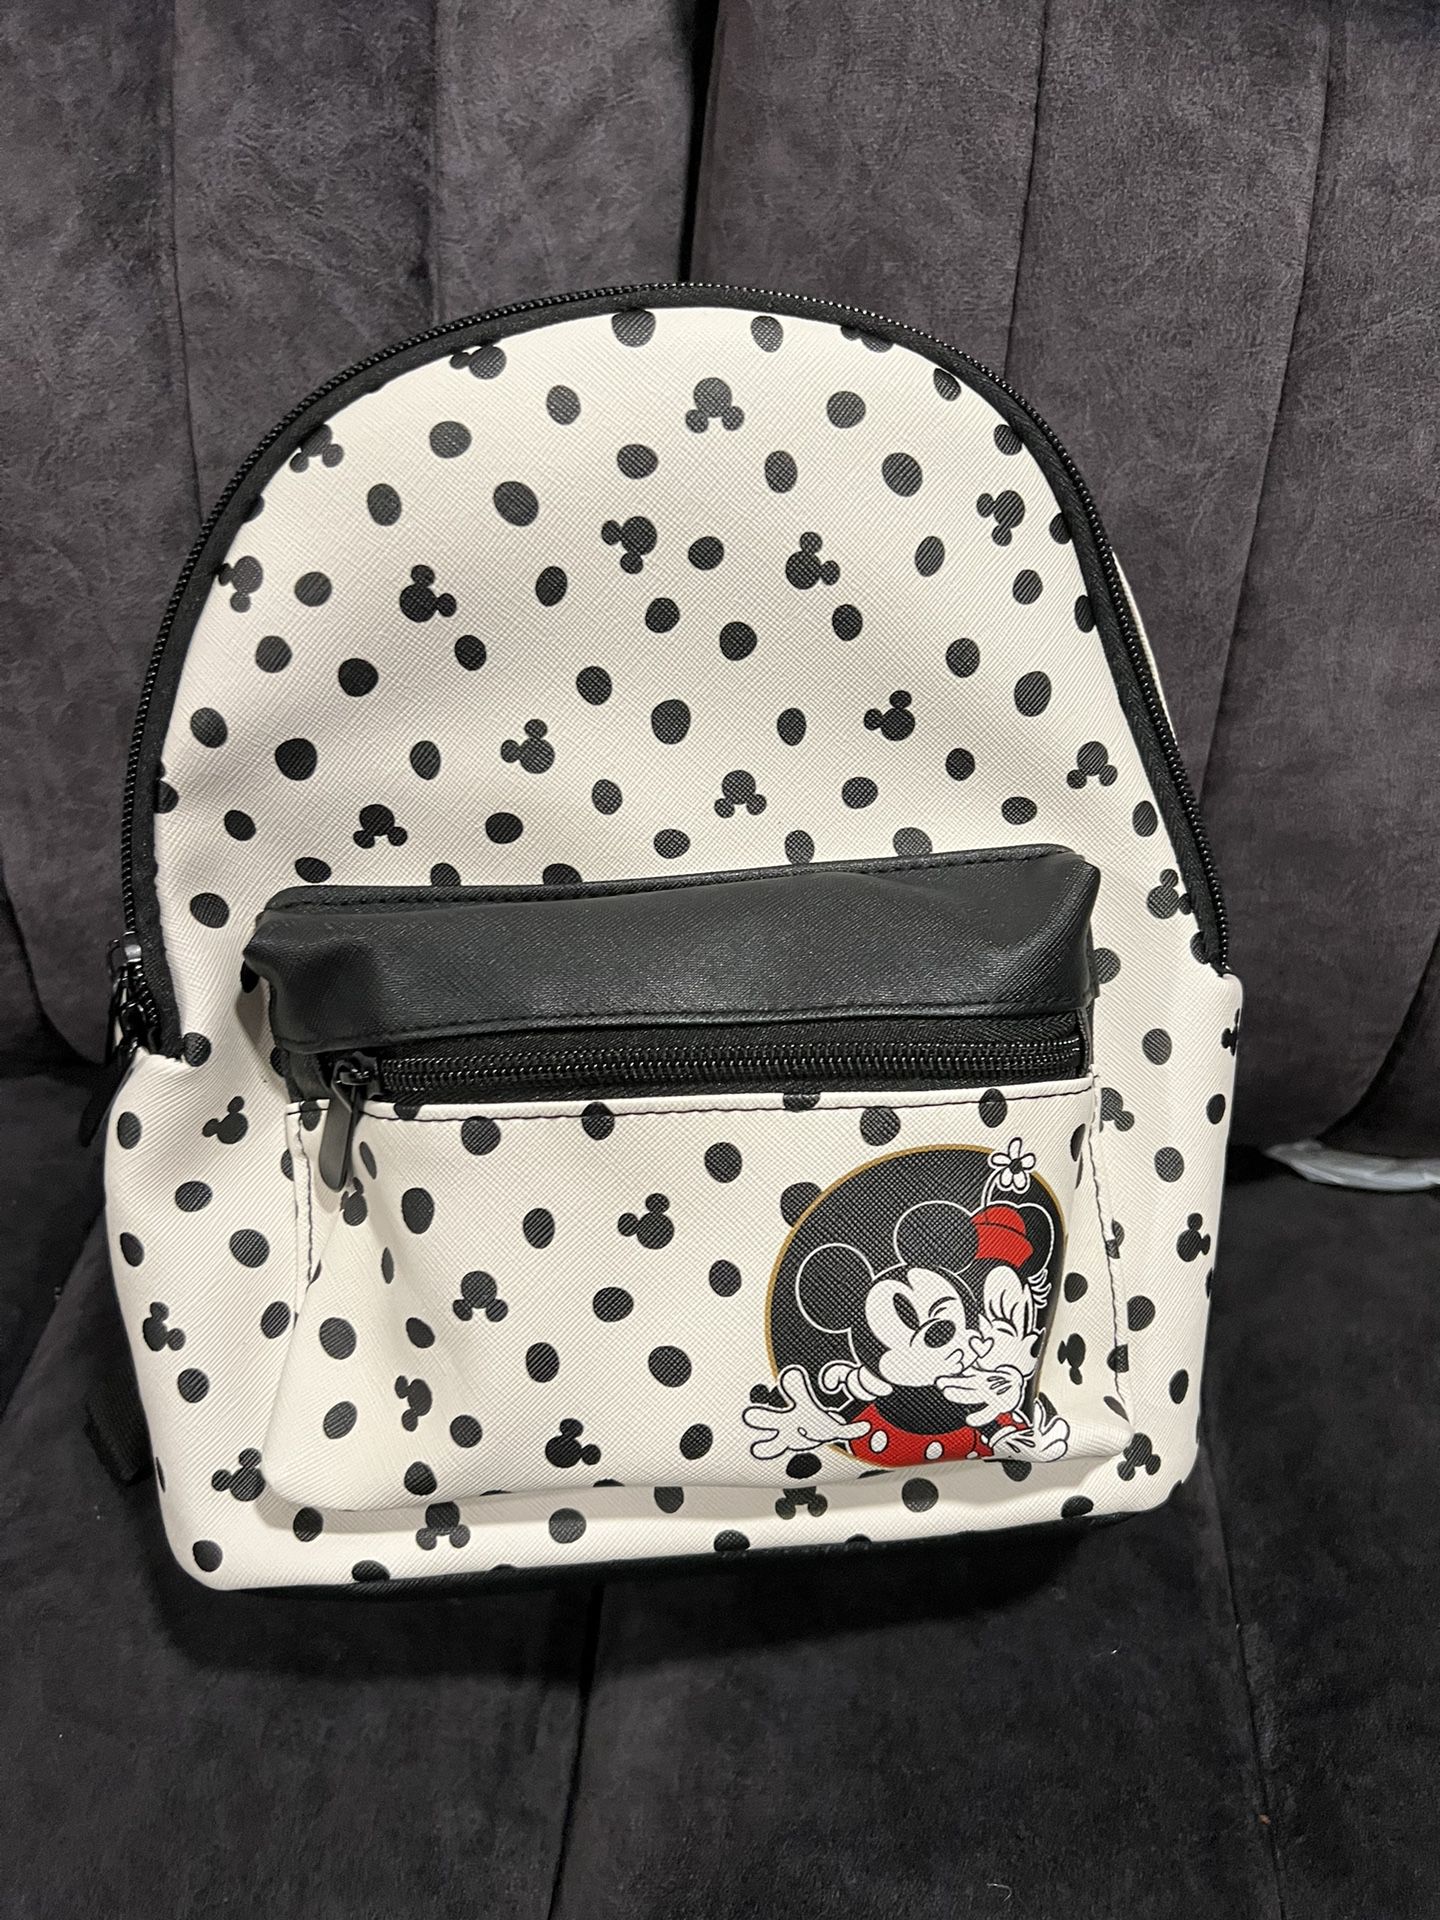 Mickey Mouse Backpack 